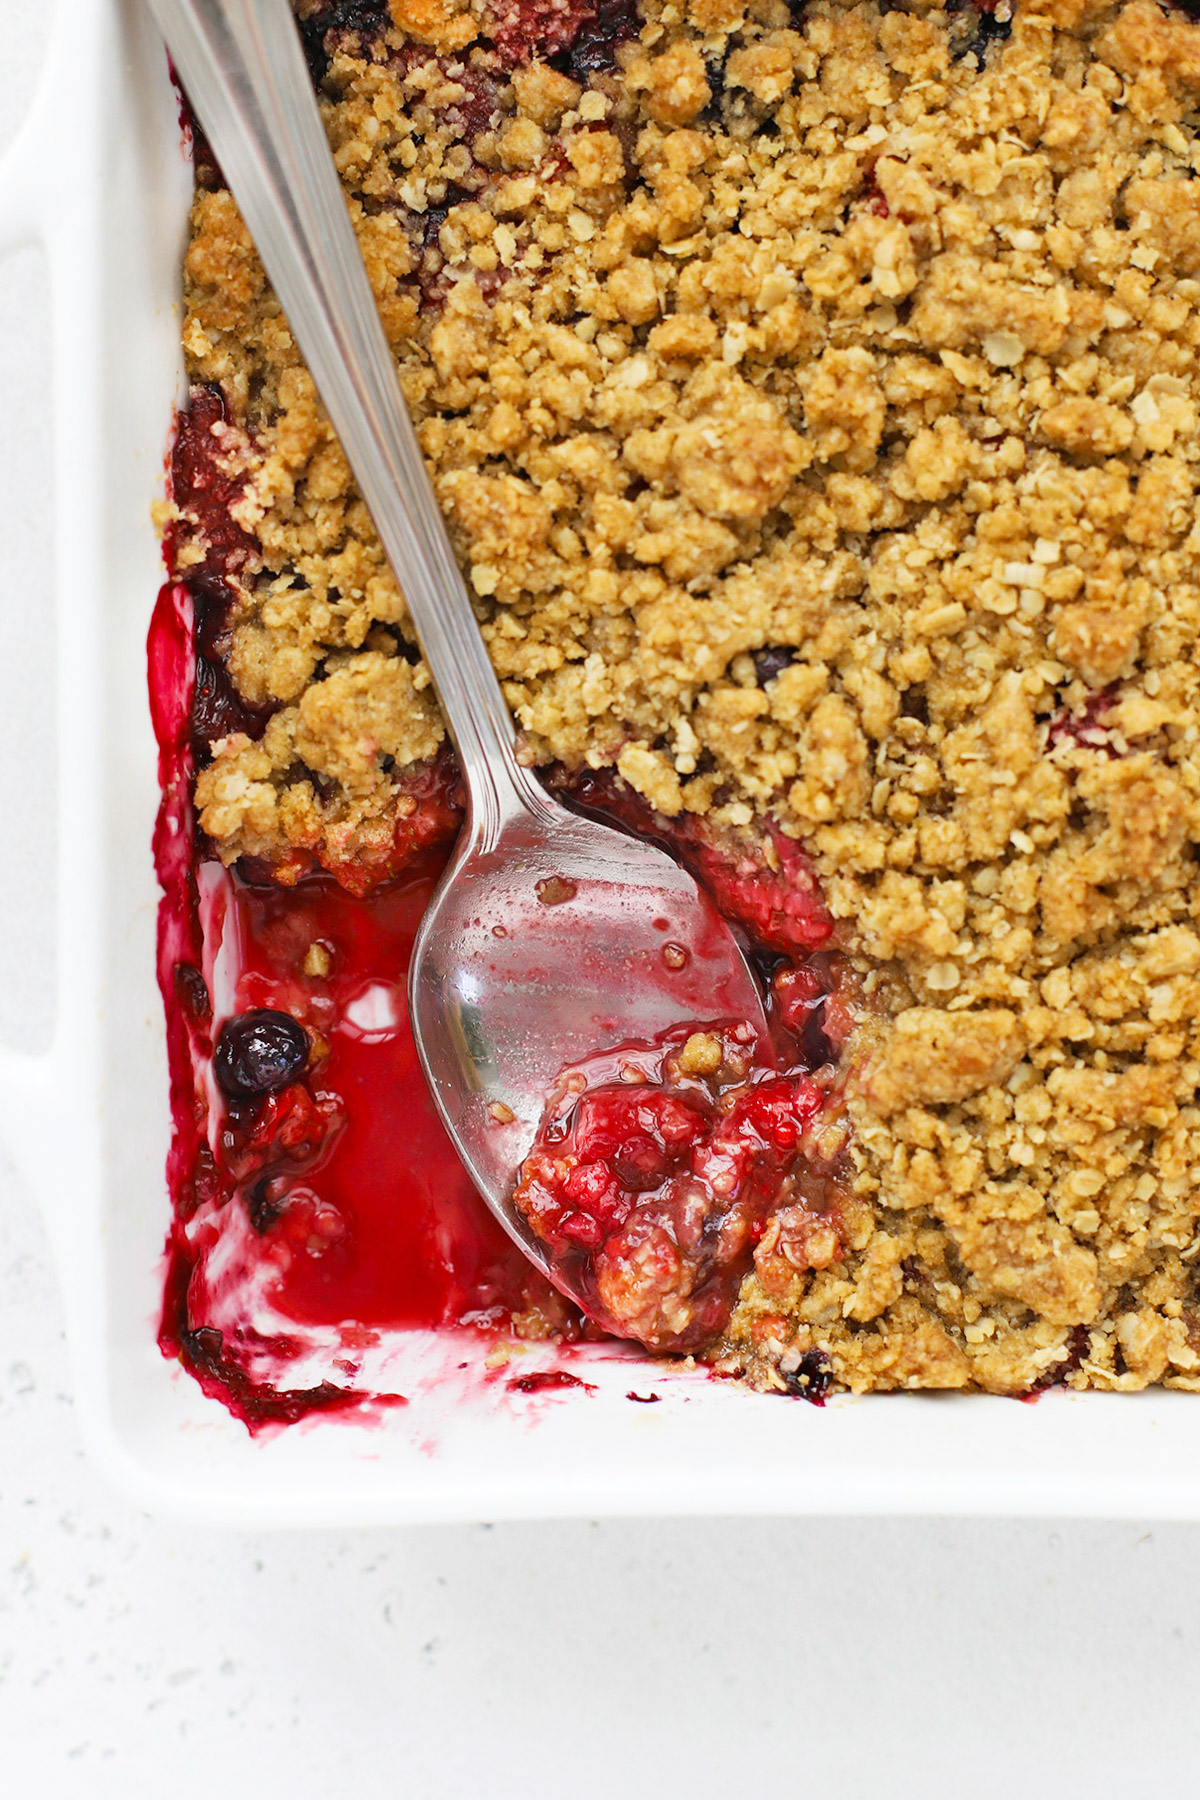 Overhead view of a baking dish of gluten-free berry crisp with a serving spoon